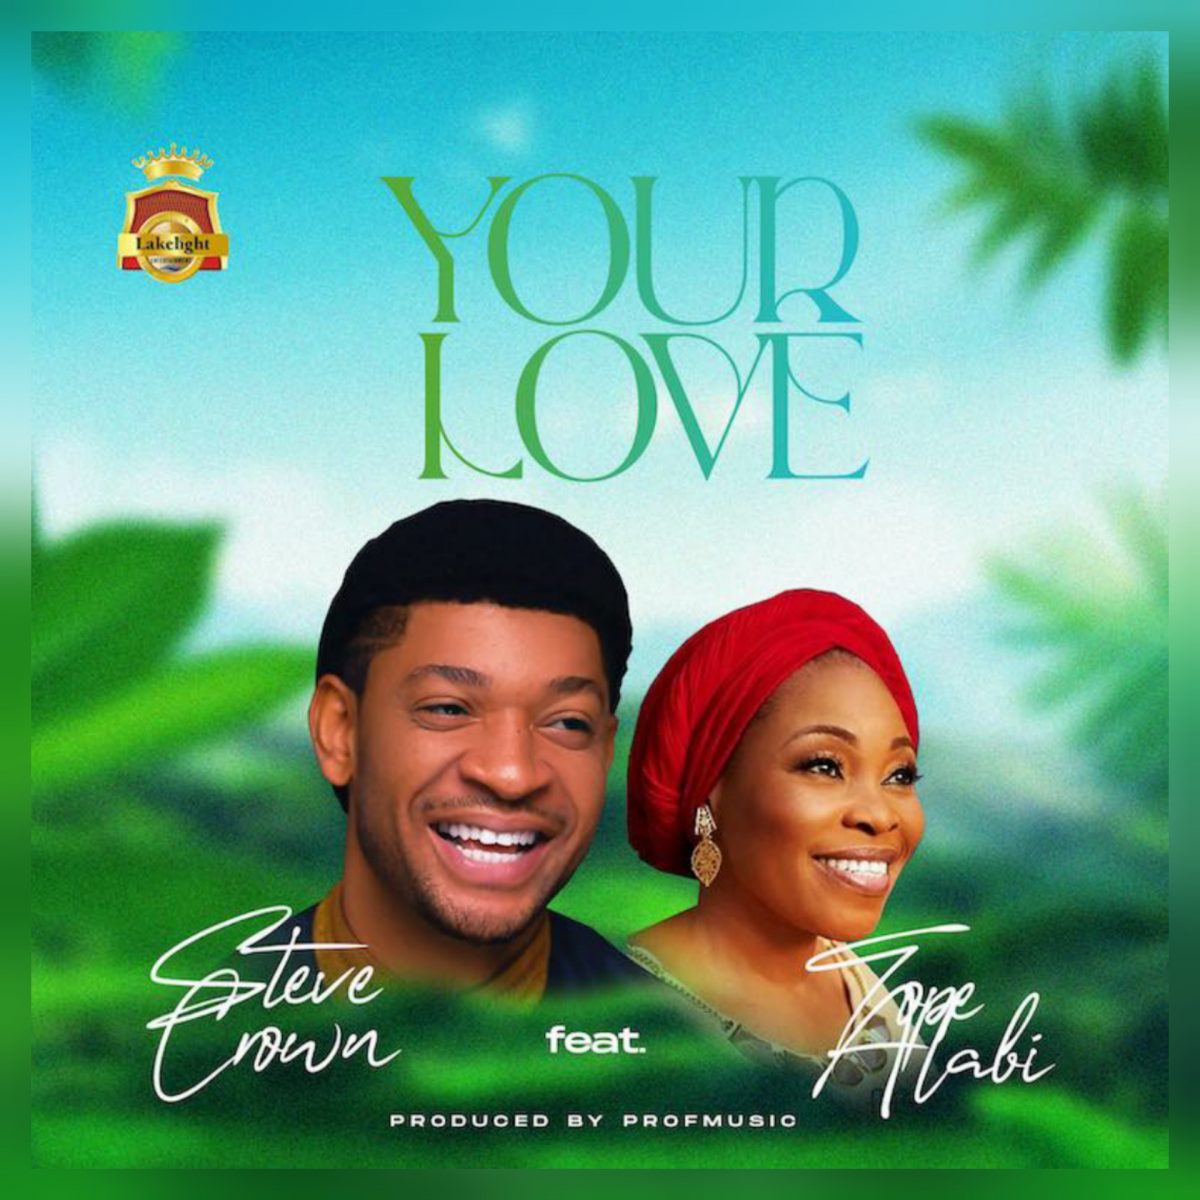 Your Love By Steve Crown Ft. Tope Alabi